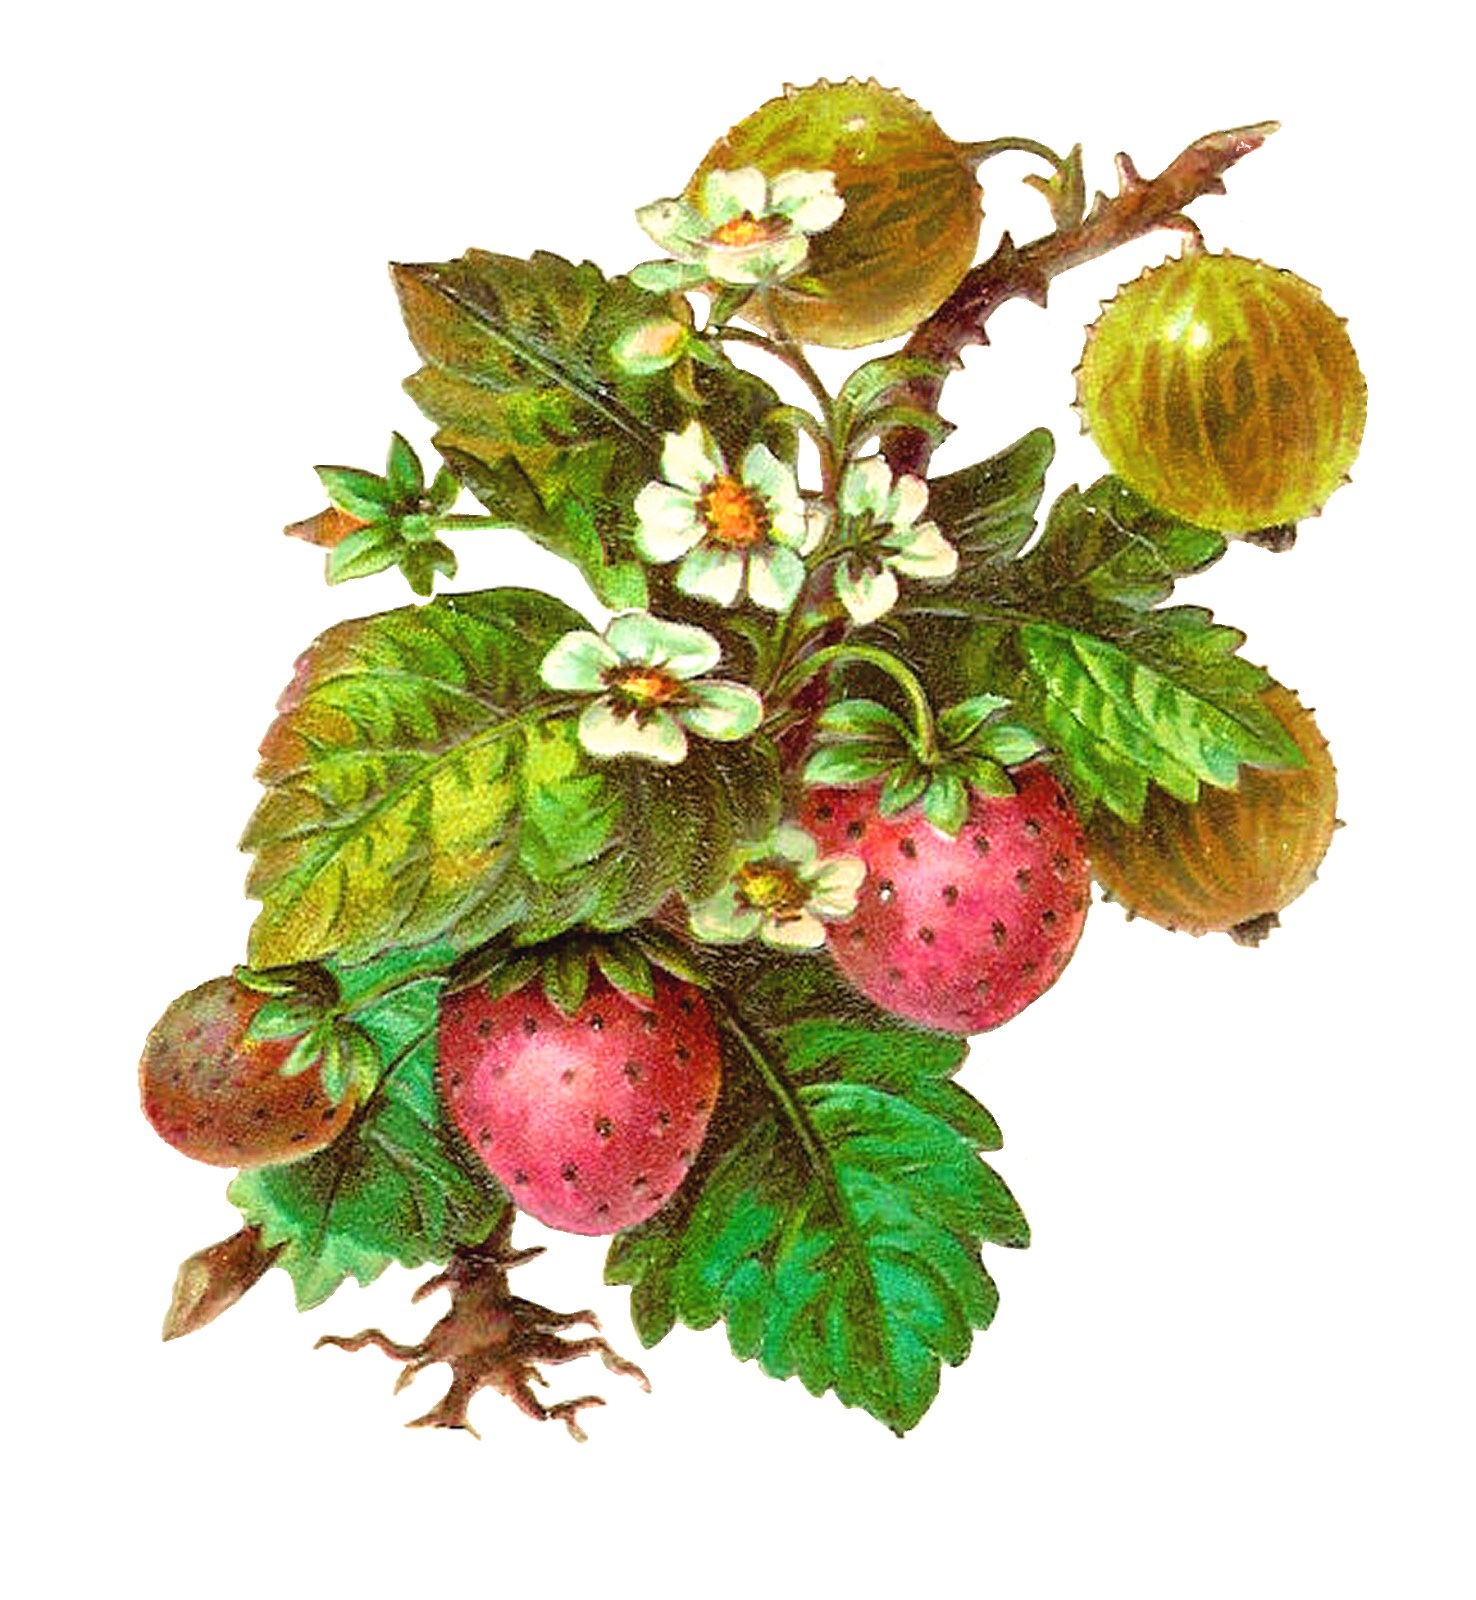 Antique Images: Free Fruit Clip Art: Strawberries and Gooseberries on Branches with Flowers